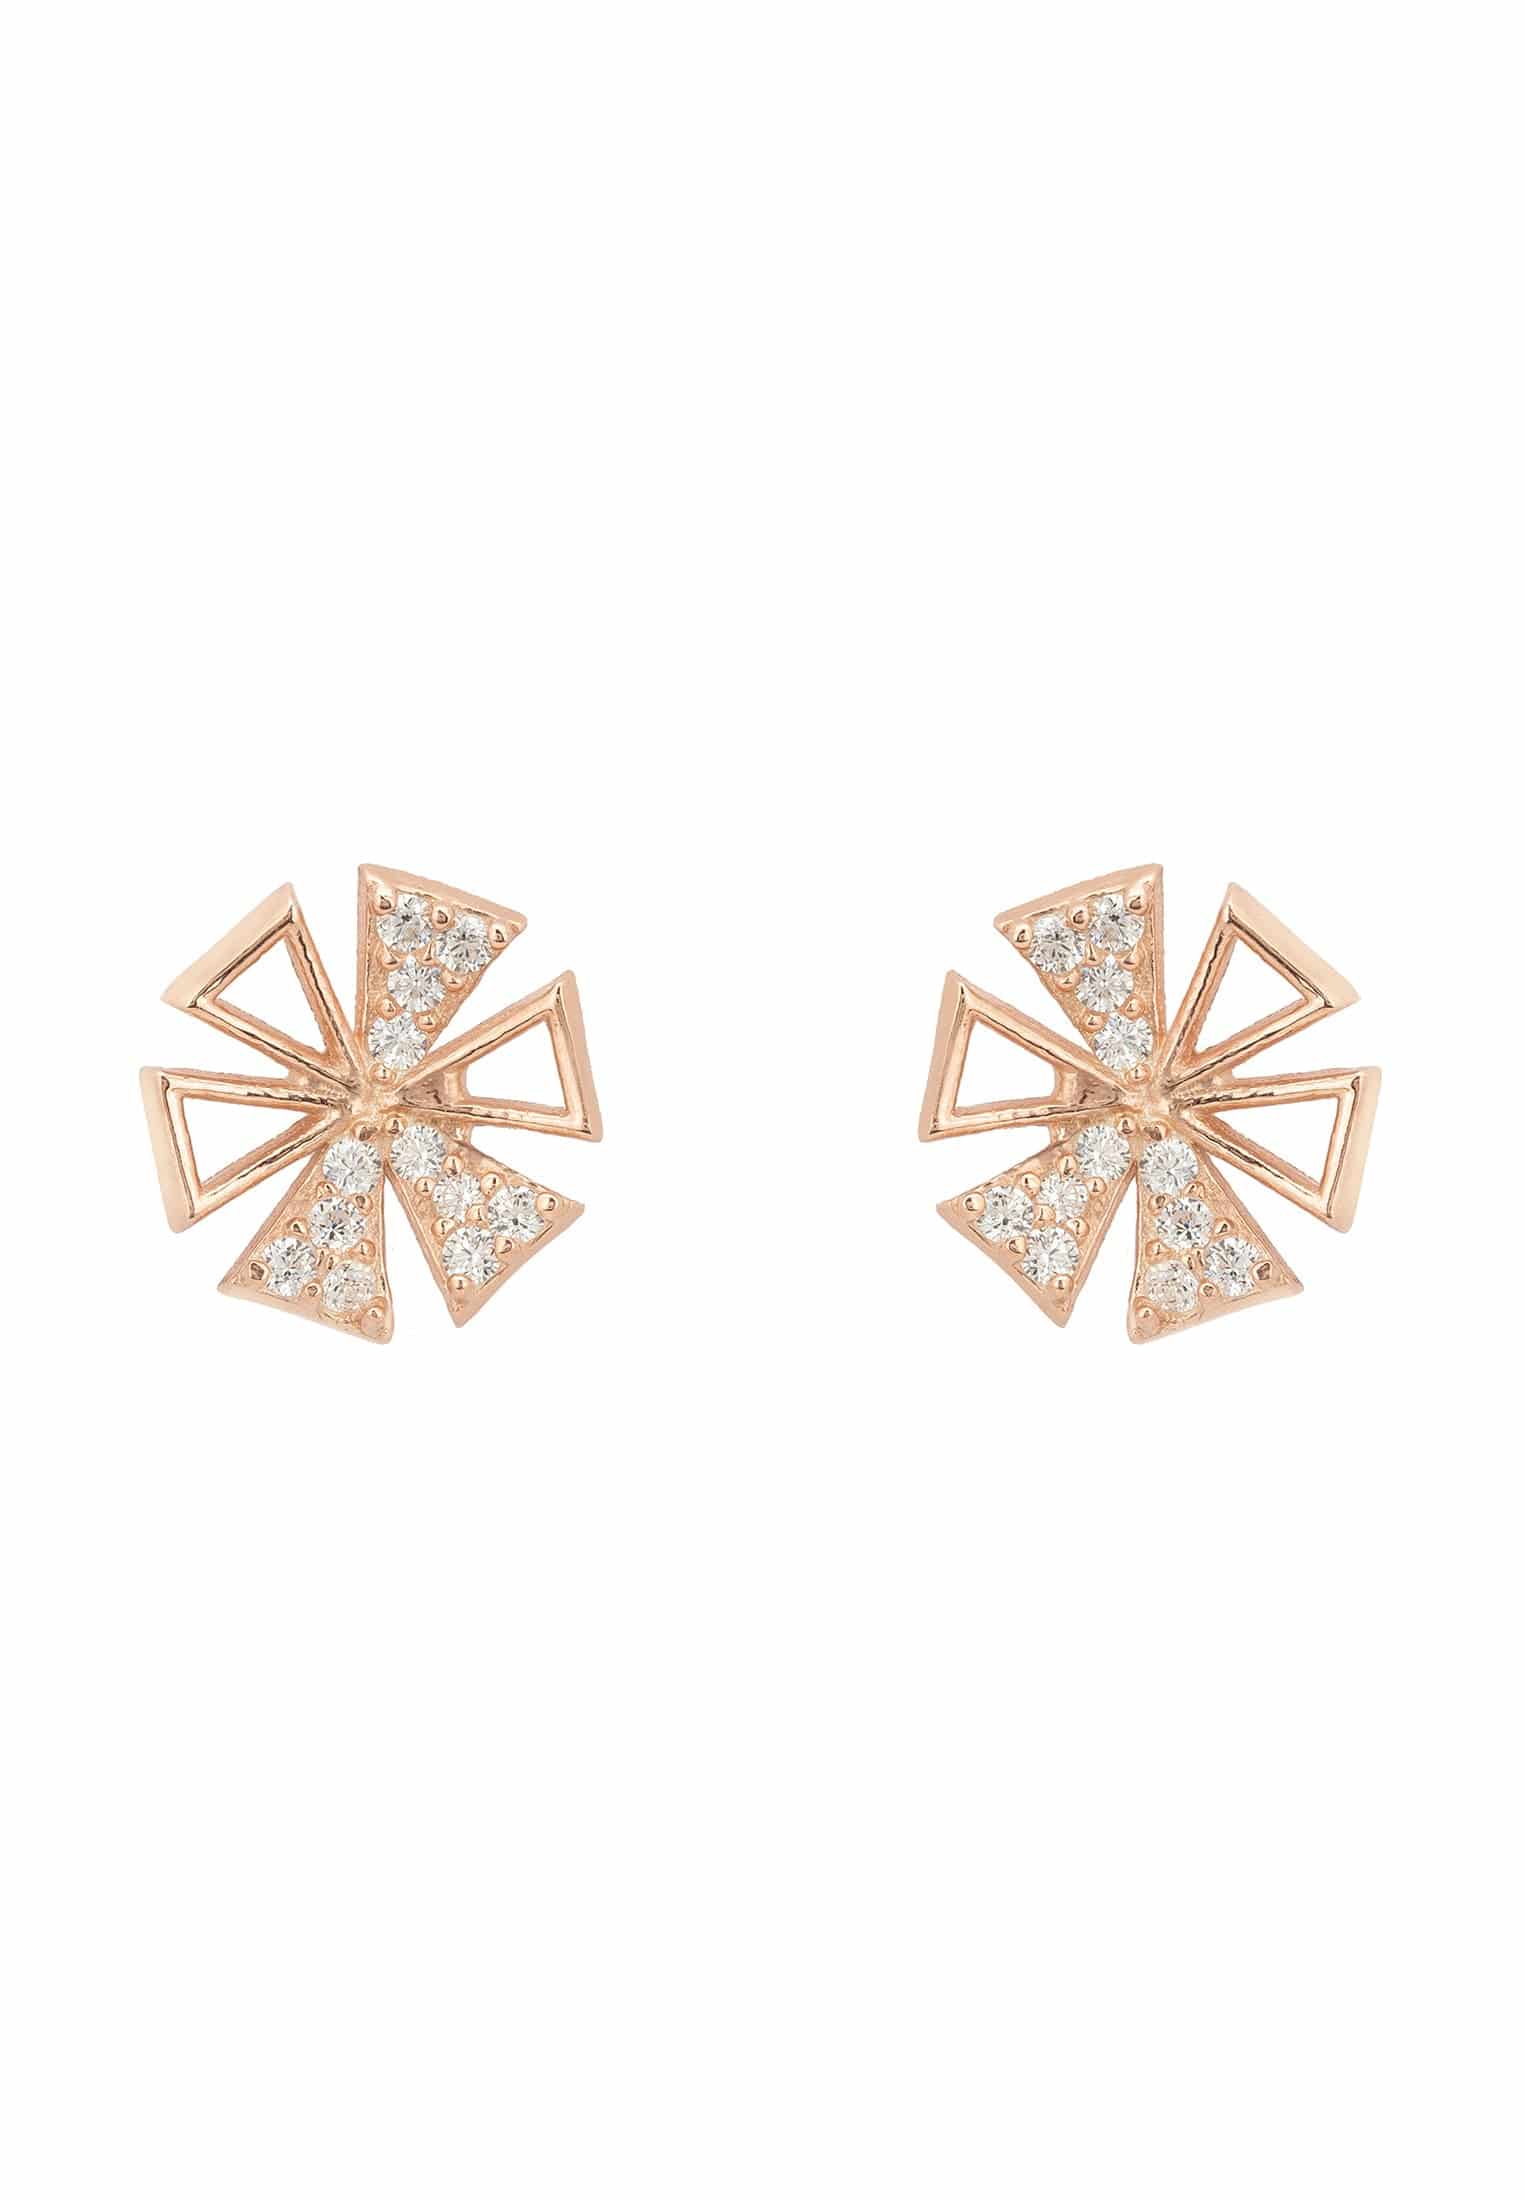 Rosegold Paris Stud Earrings with Zirconia Flower Motif - Petite and Elegant Jewelry for Everyday Sparkle - Jewelry & Watches - Bijou Her -  -  - 